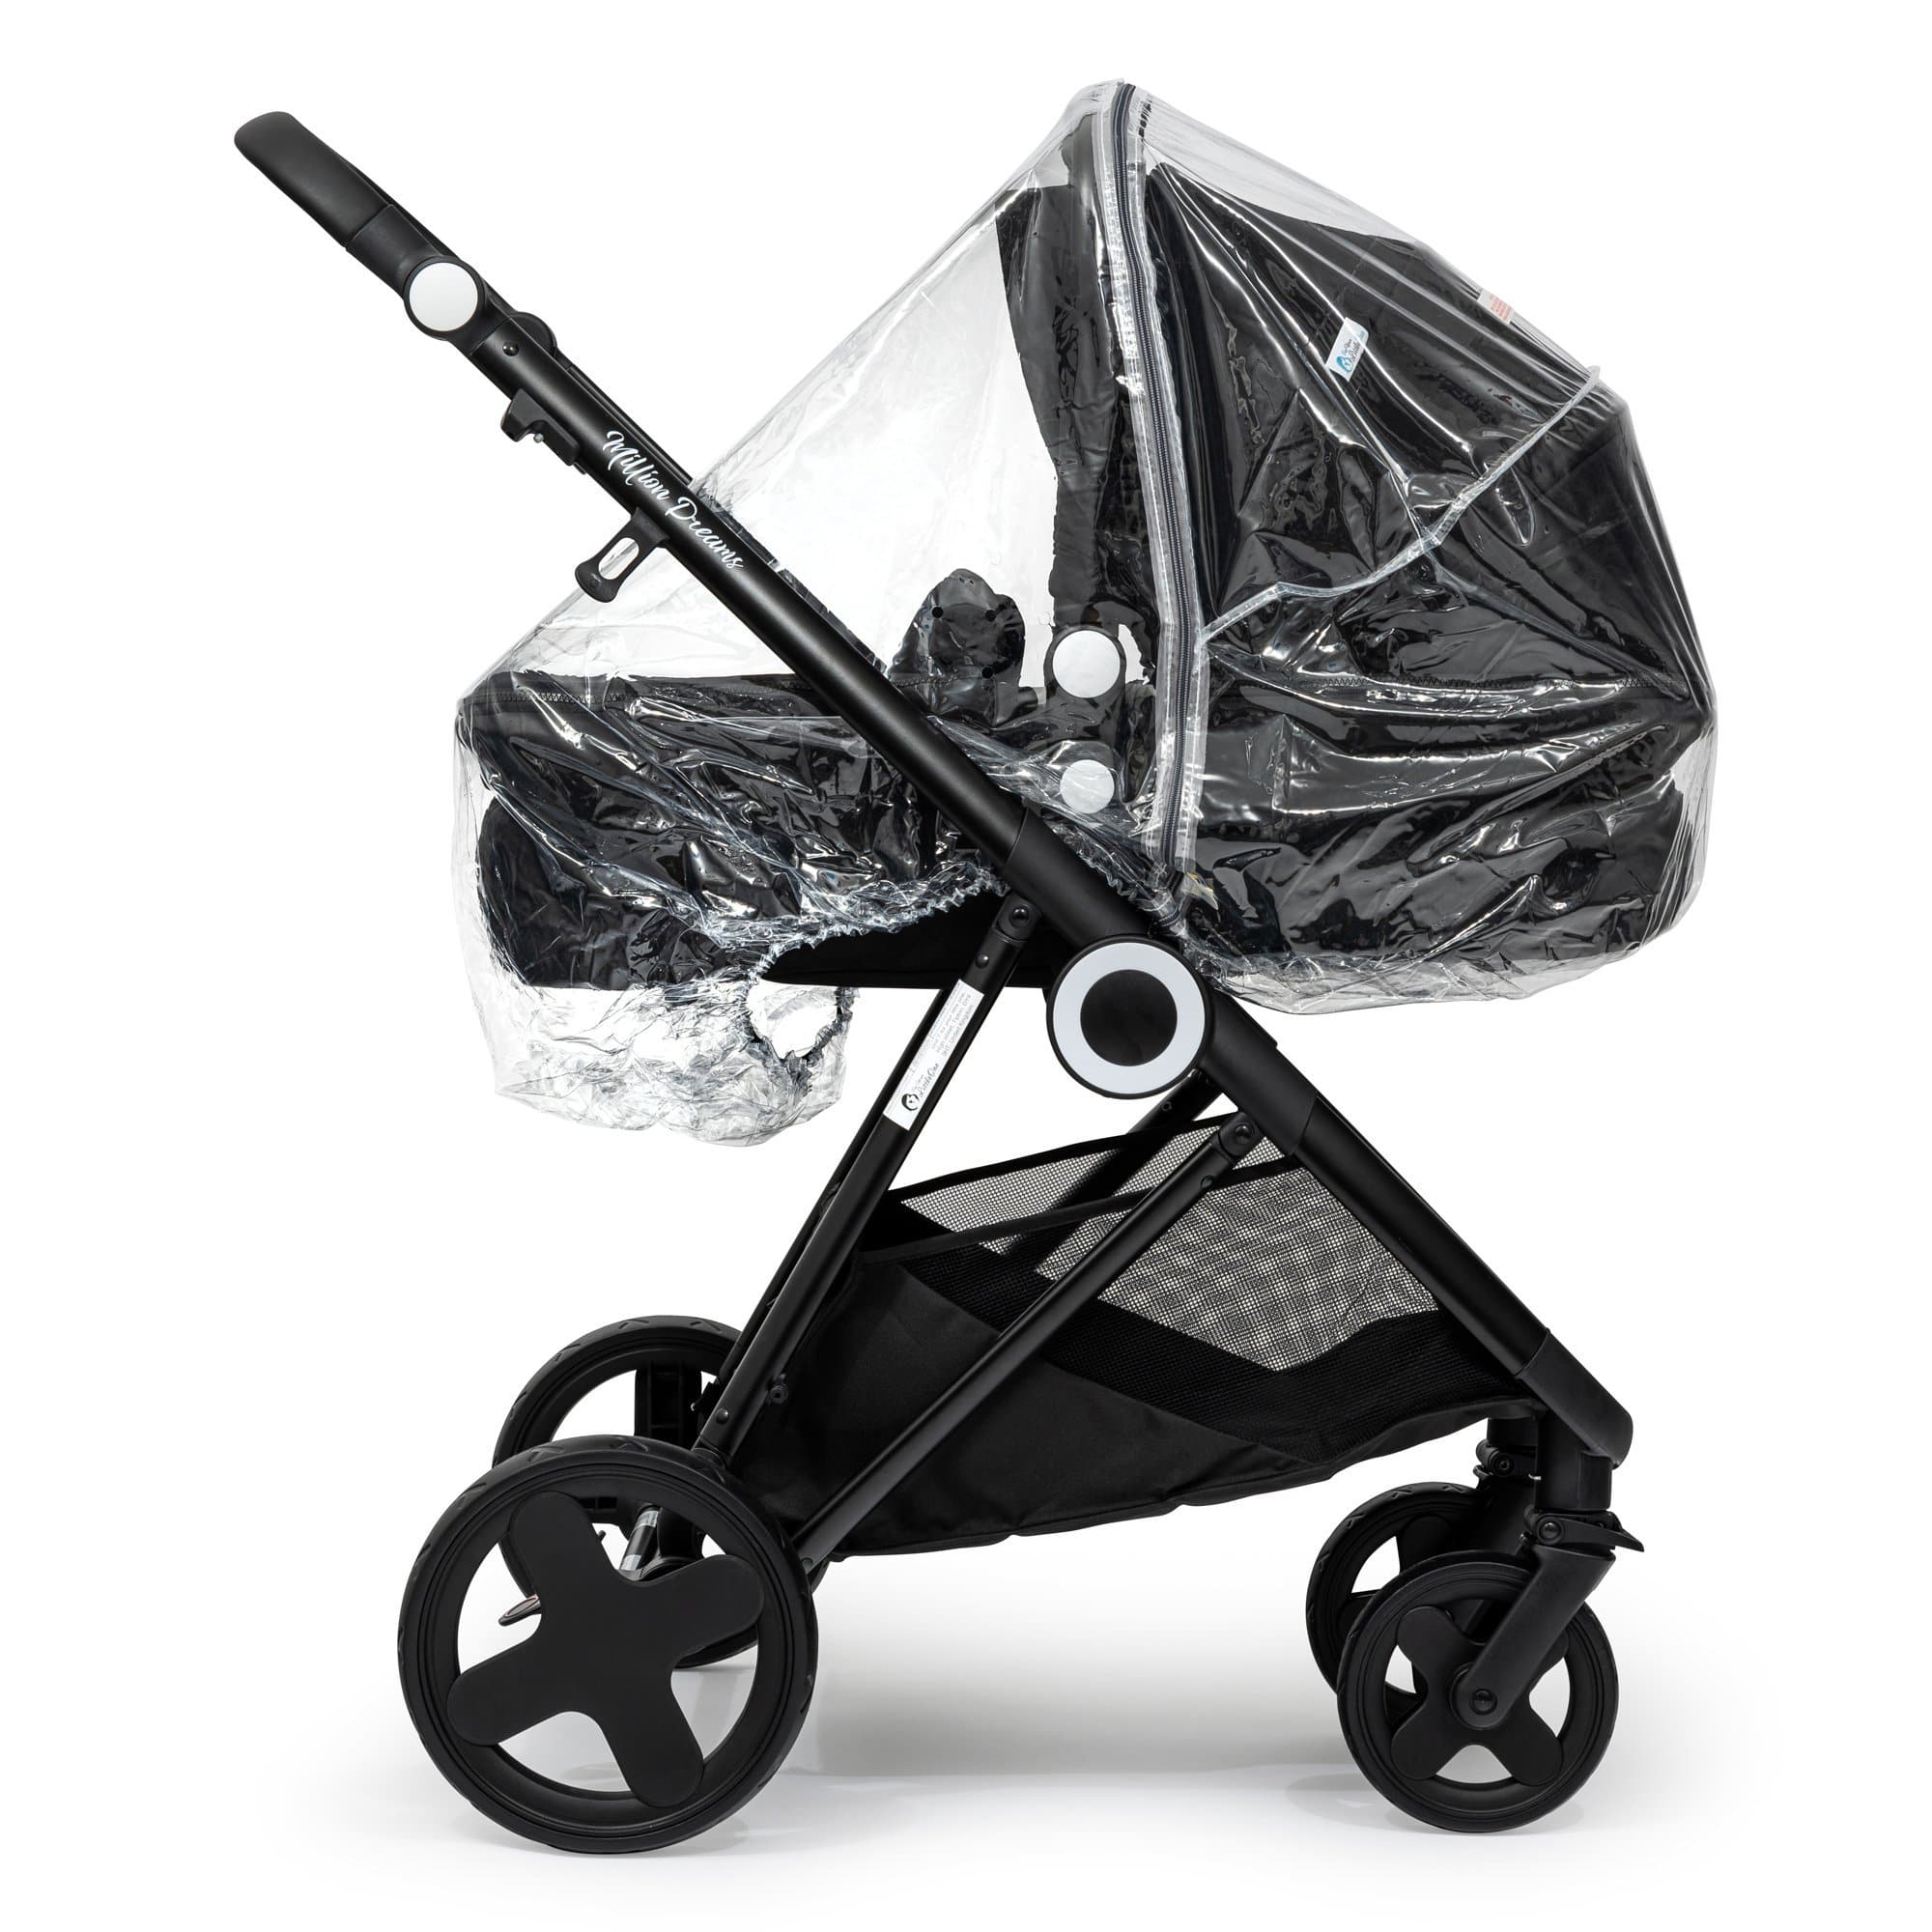 2 in 1 Rain Cover Compatible with Maclaren - Fits All Models - For Your Little One